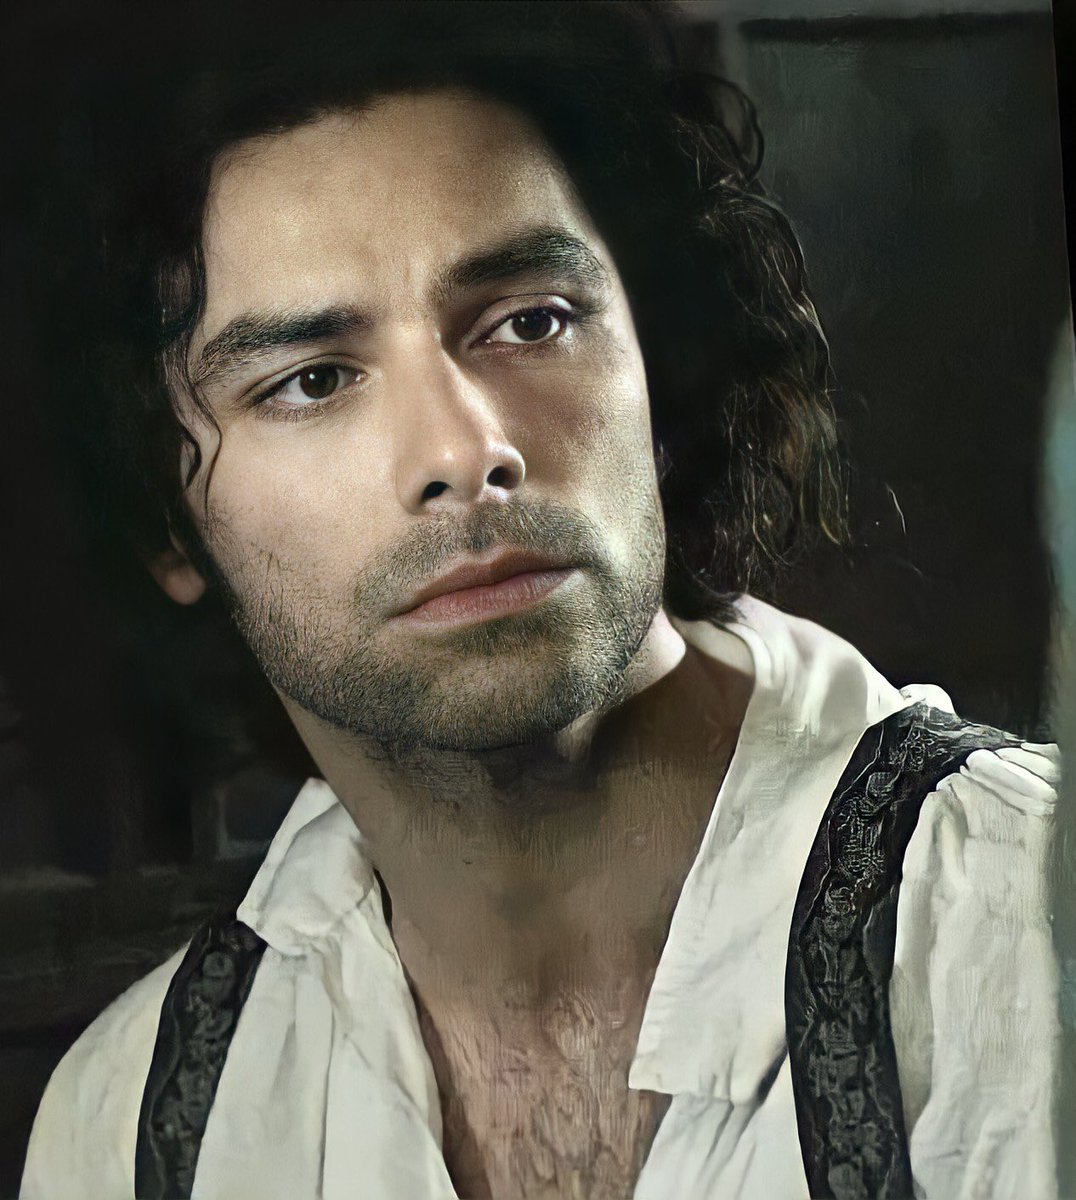 After a long break, I watched the first season of #Poldark again yesterday because it was on TV. Still so so good! Happy #StubbleSaturday! #ItWillAlwaysBeRoss ❤️ #AidanTurner #AidanCrew
Photocredit to owner.